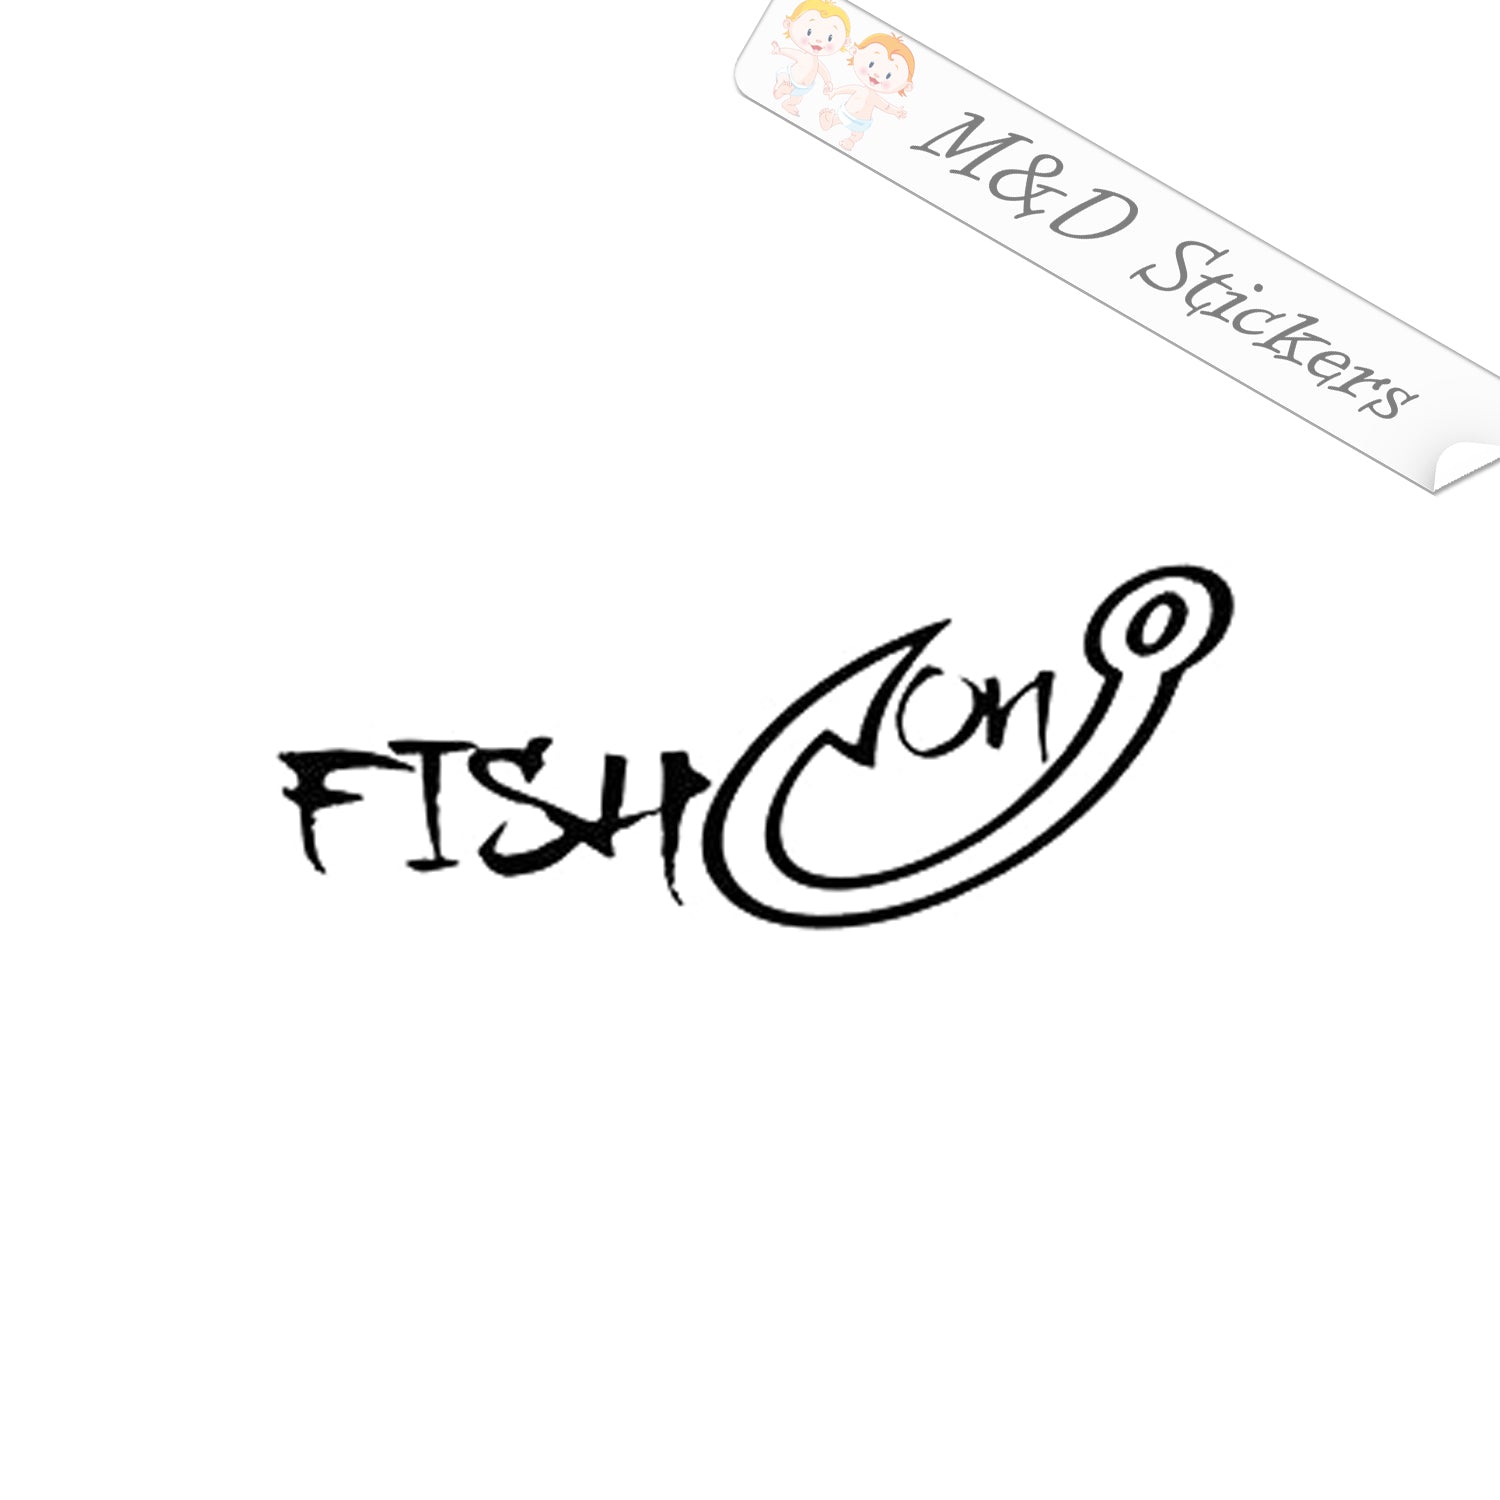 2x Fish on hook Decal Sticker Different colors & size for Cars